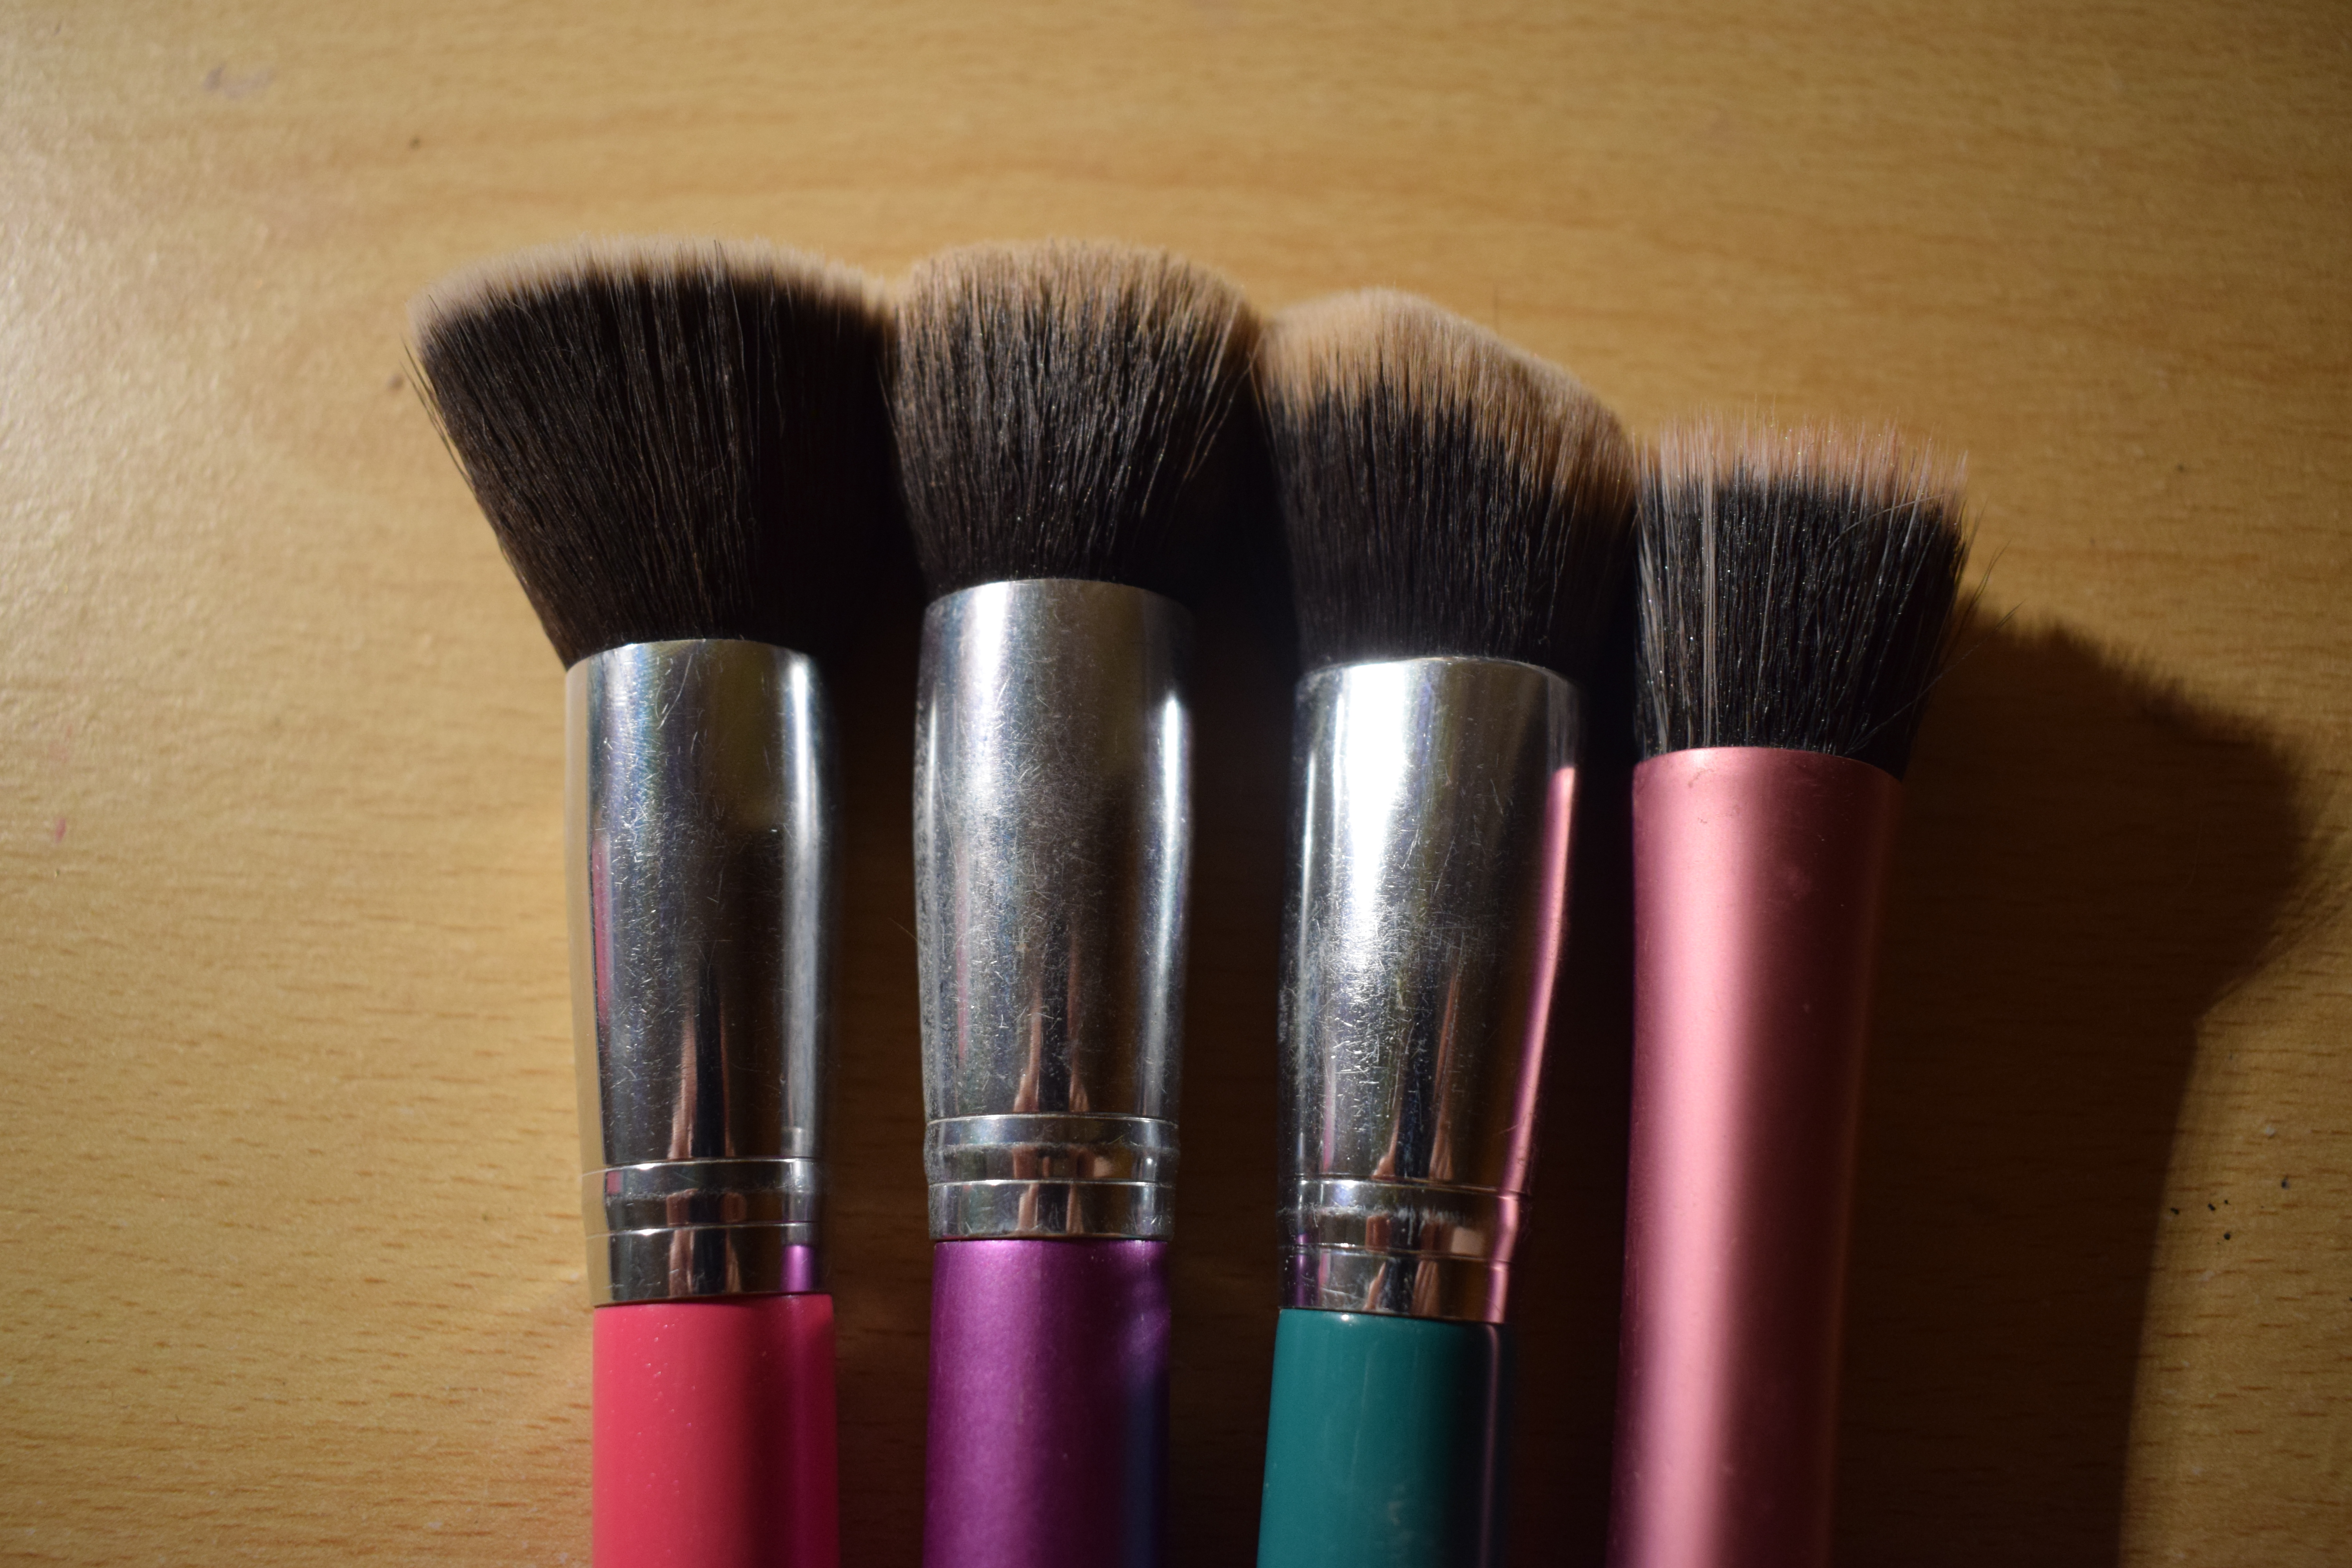 stylpro makeup brush cleaner review